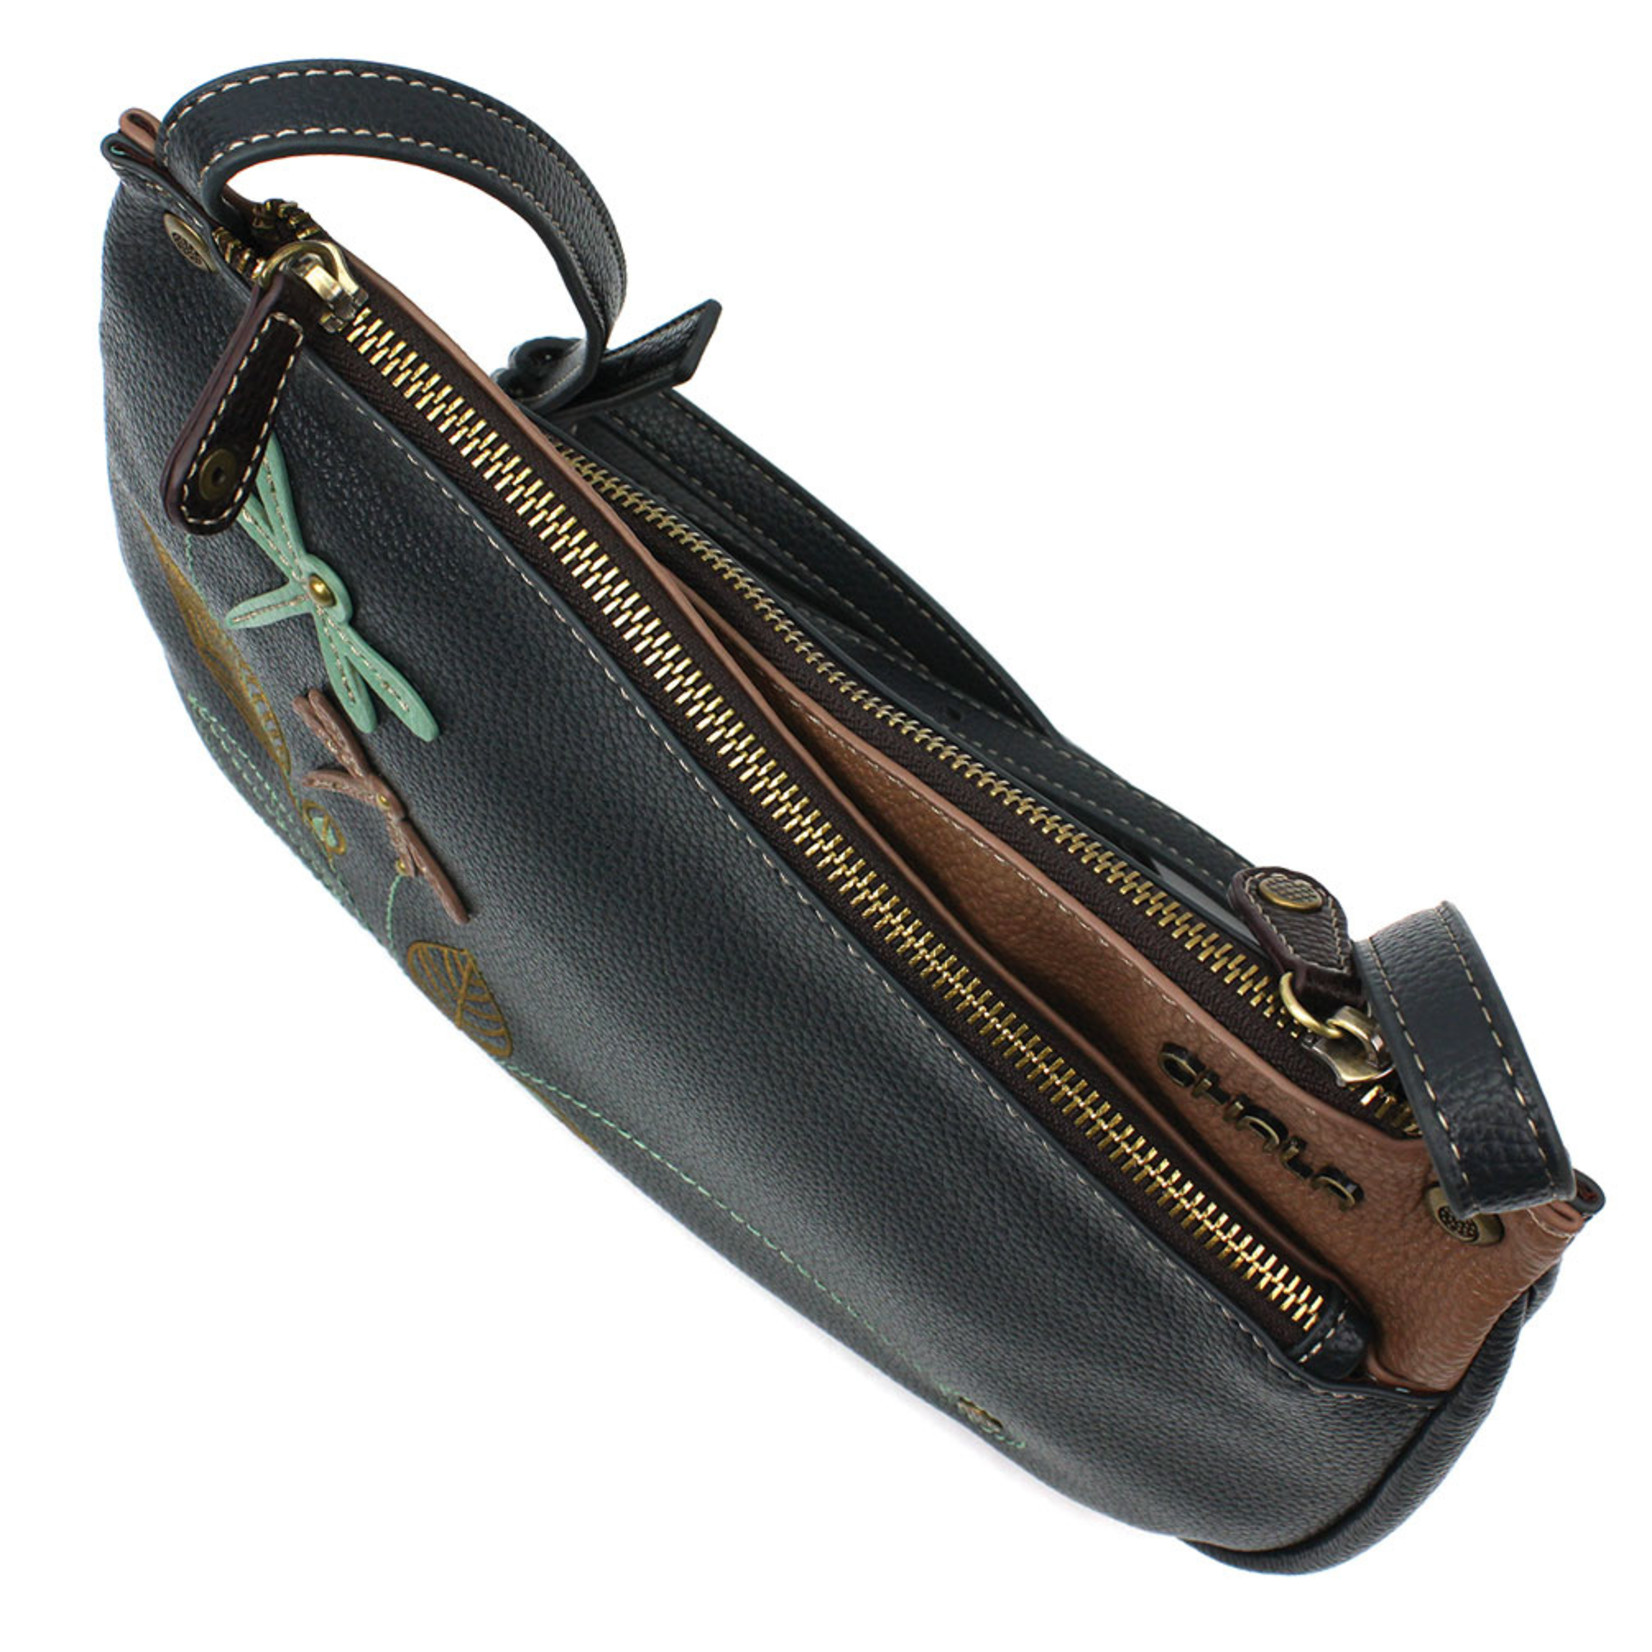 Dragonfly Criss Crossbody Details about   Chala Purse